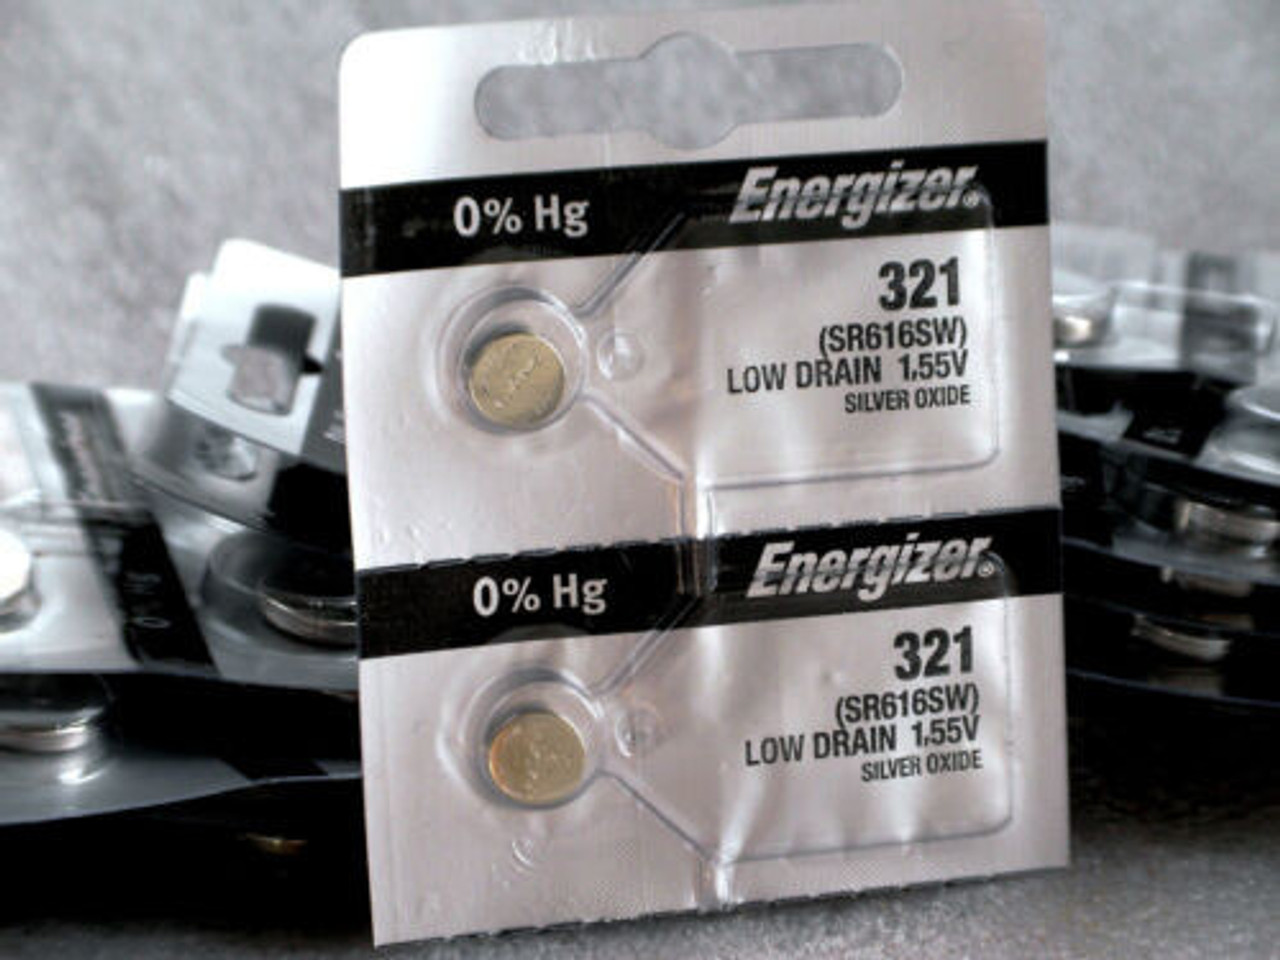  Energizer 321 / SR616 Silver Oxide Button Battery 1.55V - 2 Pack + FREE SHIPPING! 